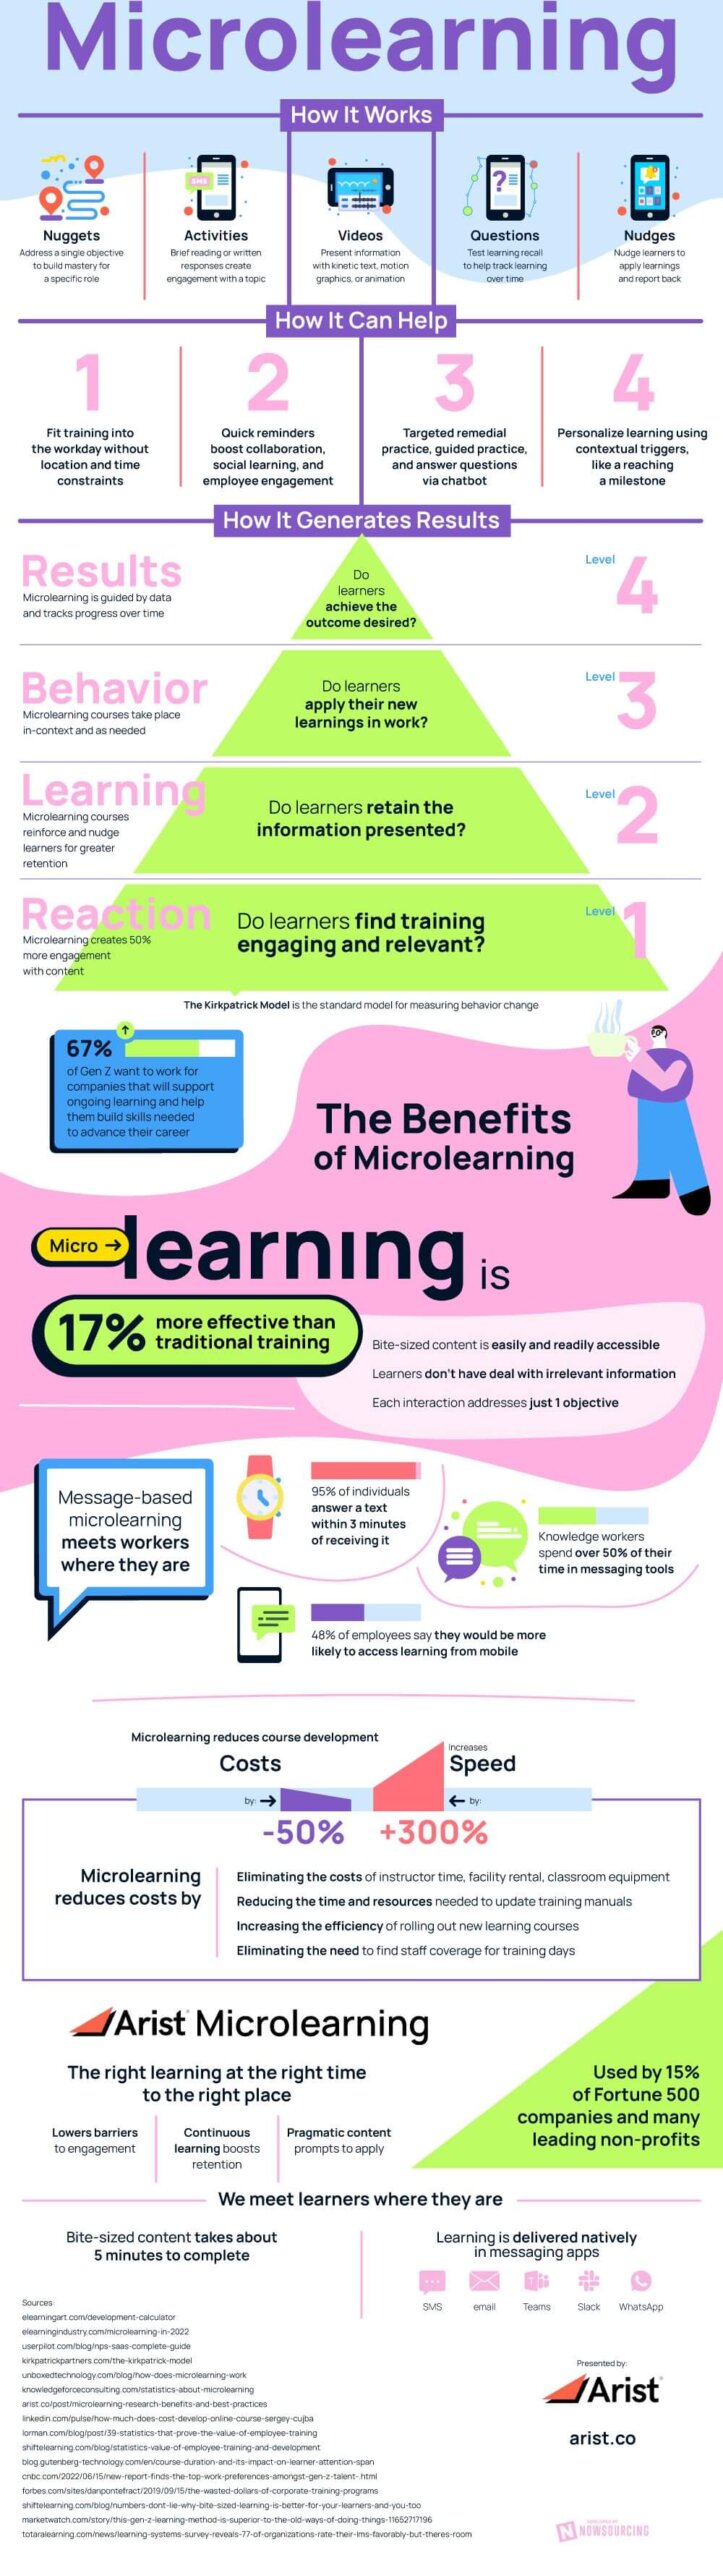 microlearning